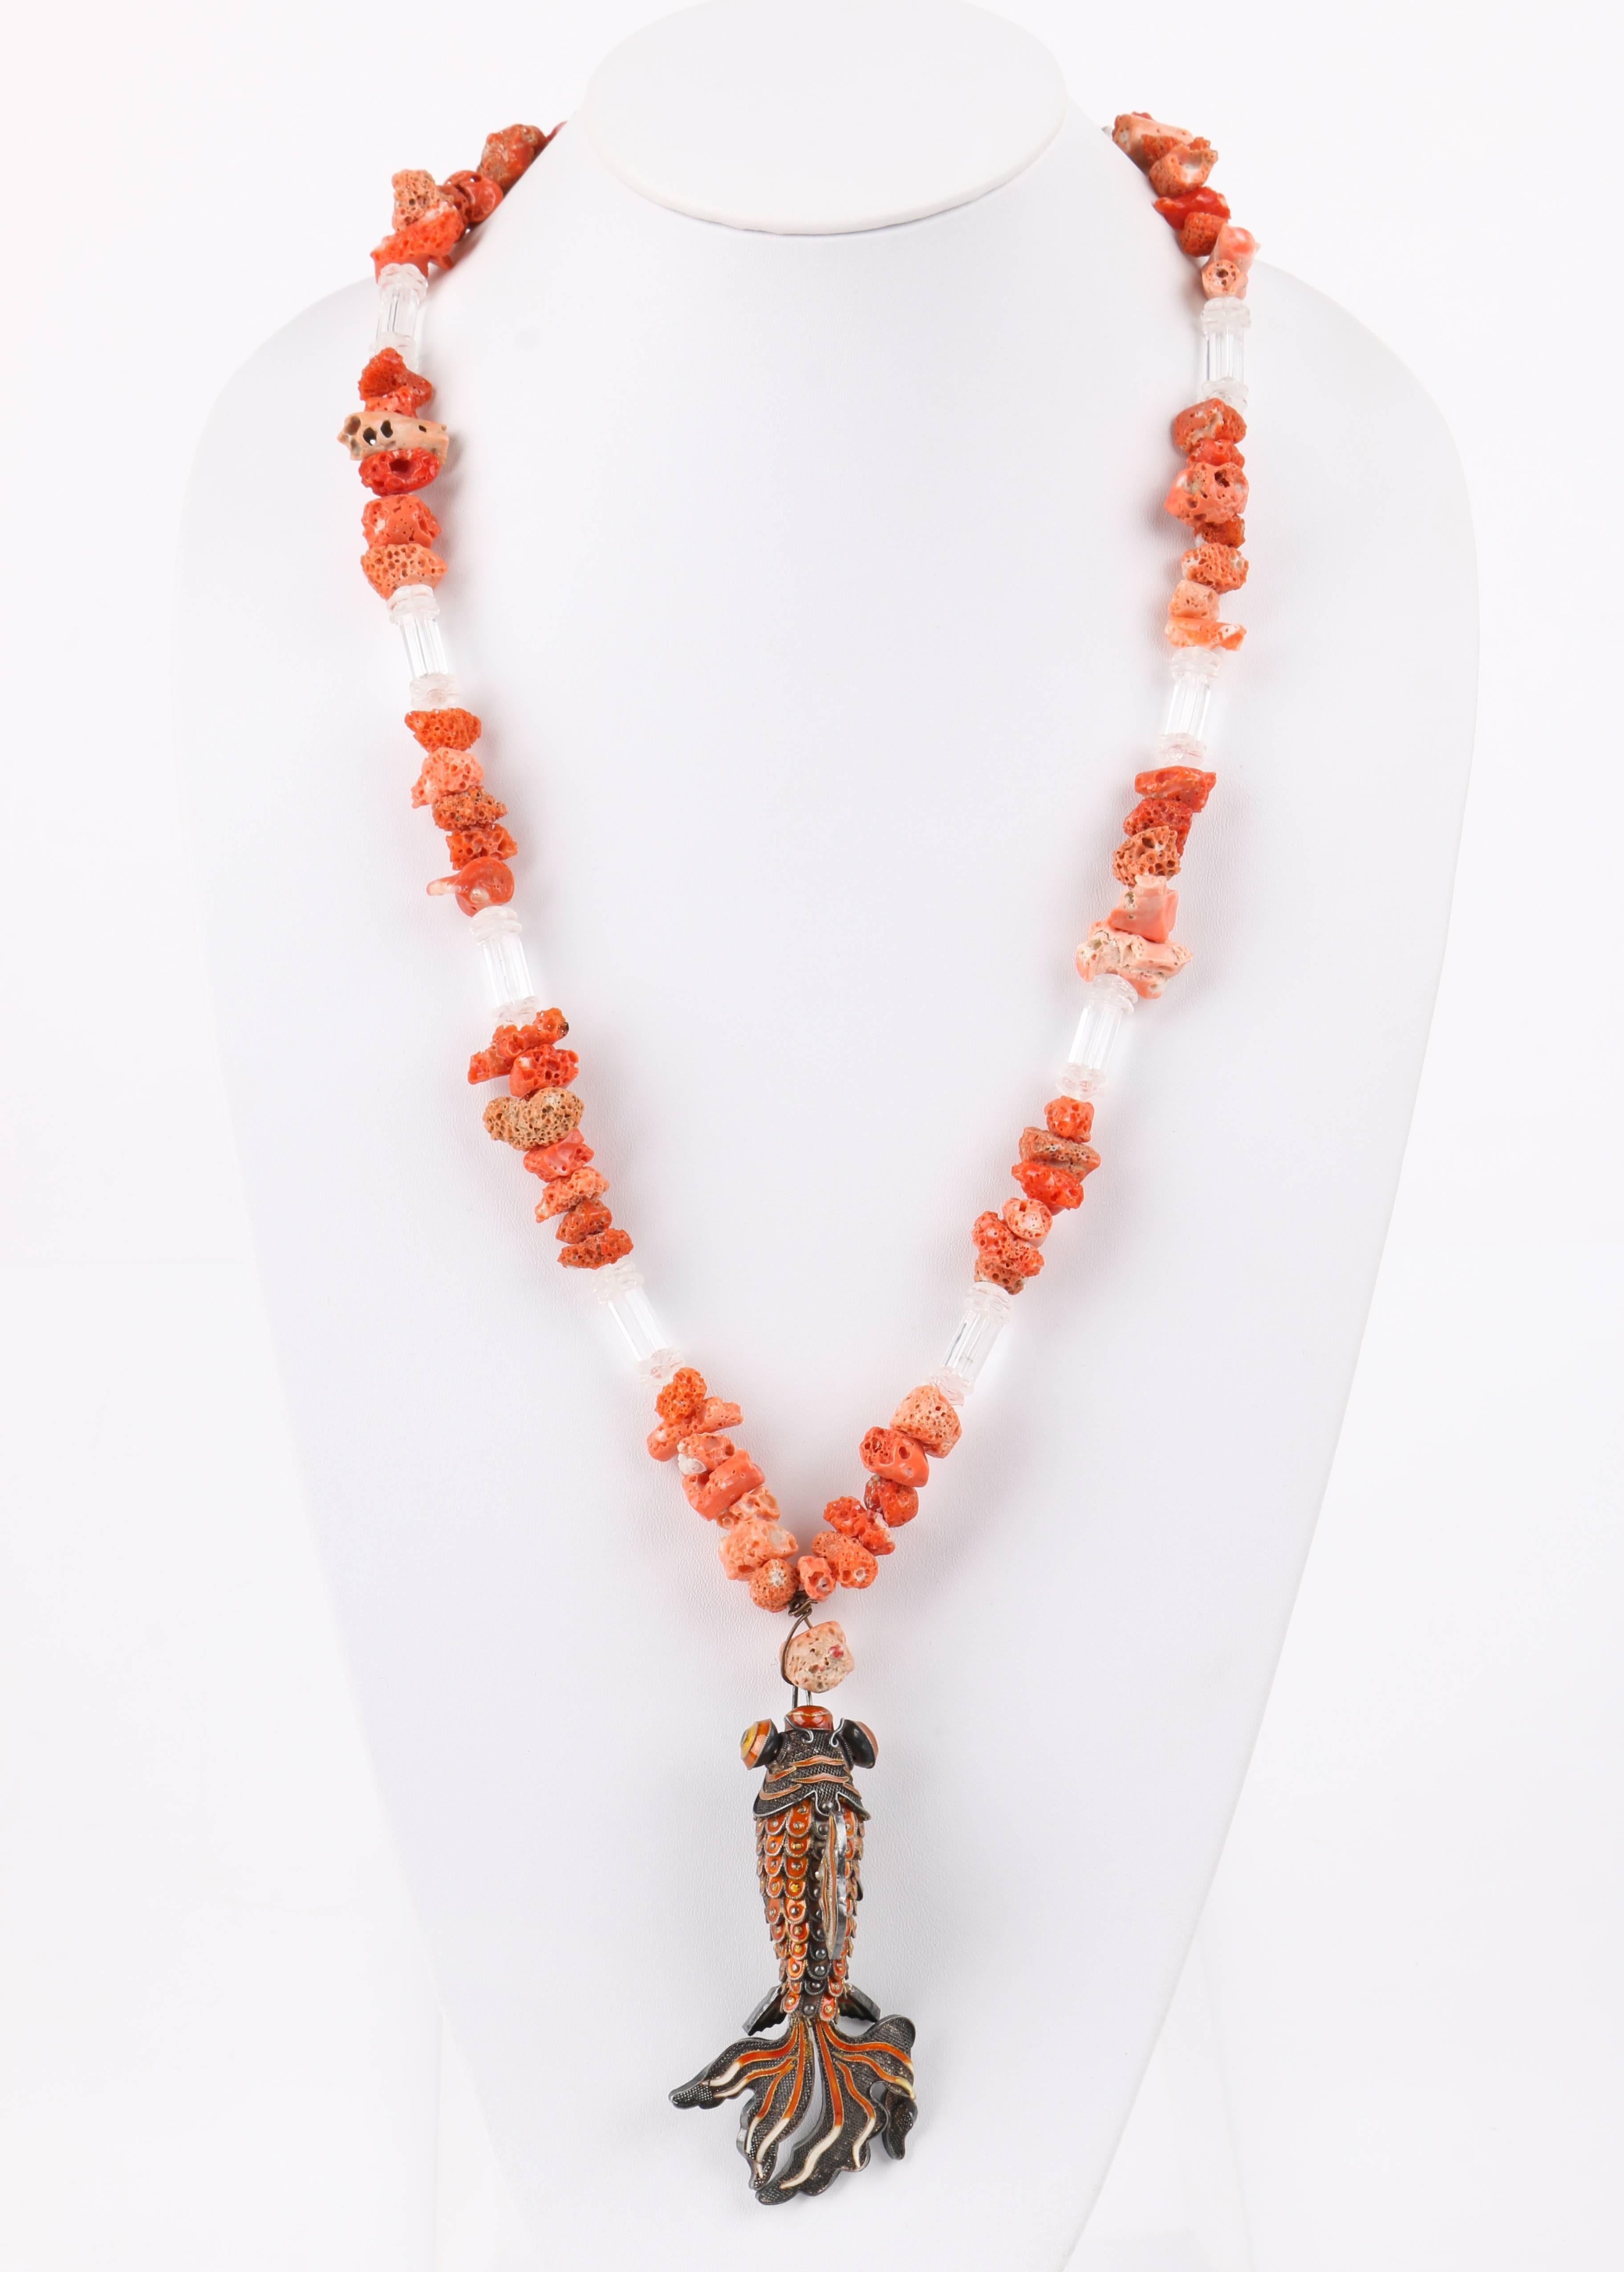 Vintage raw coral and clear beaded articulated cloisonne enamel koi fish pendant necklace. Silver-toned sculptural metal Chinese koi fish pendant with articulated body, eyes, and fins. Cloisonne enamel detail along scales, fins, face, and eyes in